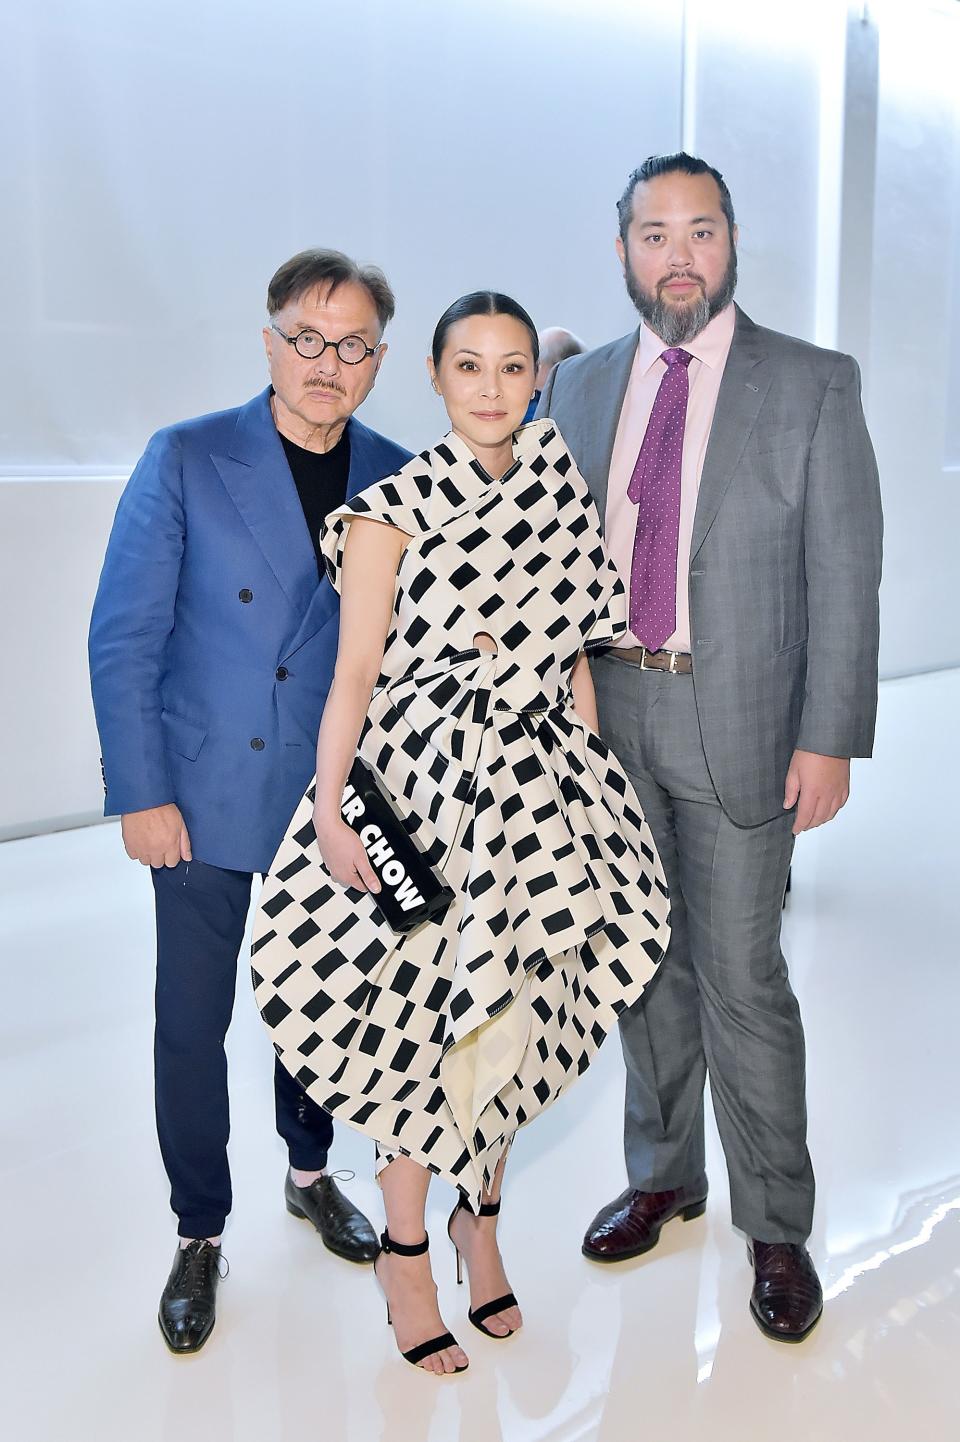 Michael Chow, China Chow, and Maximillian Chow